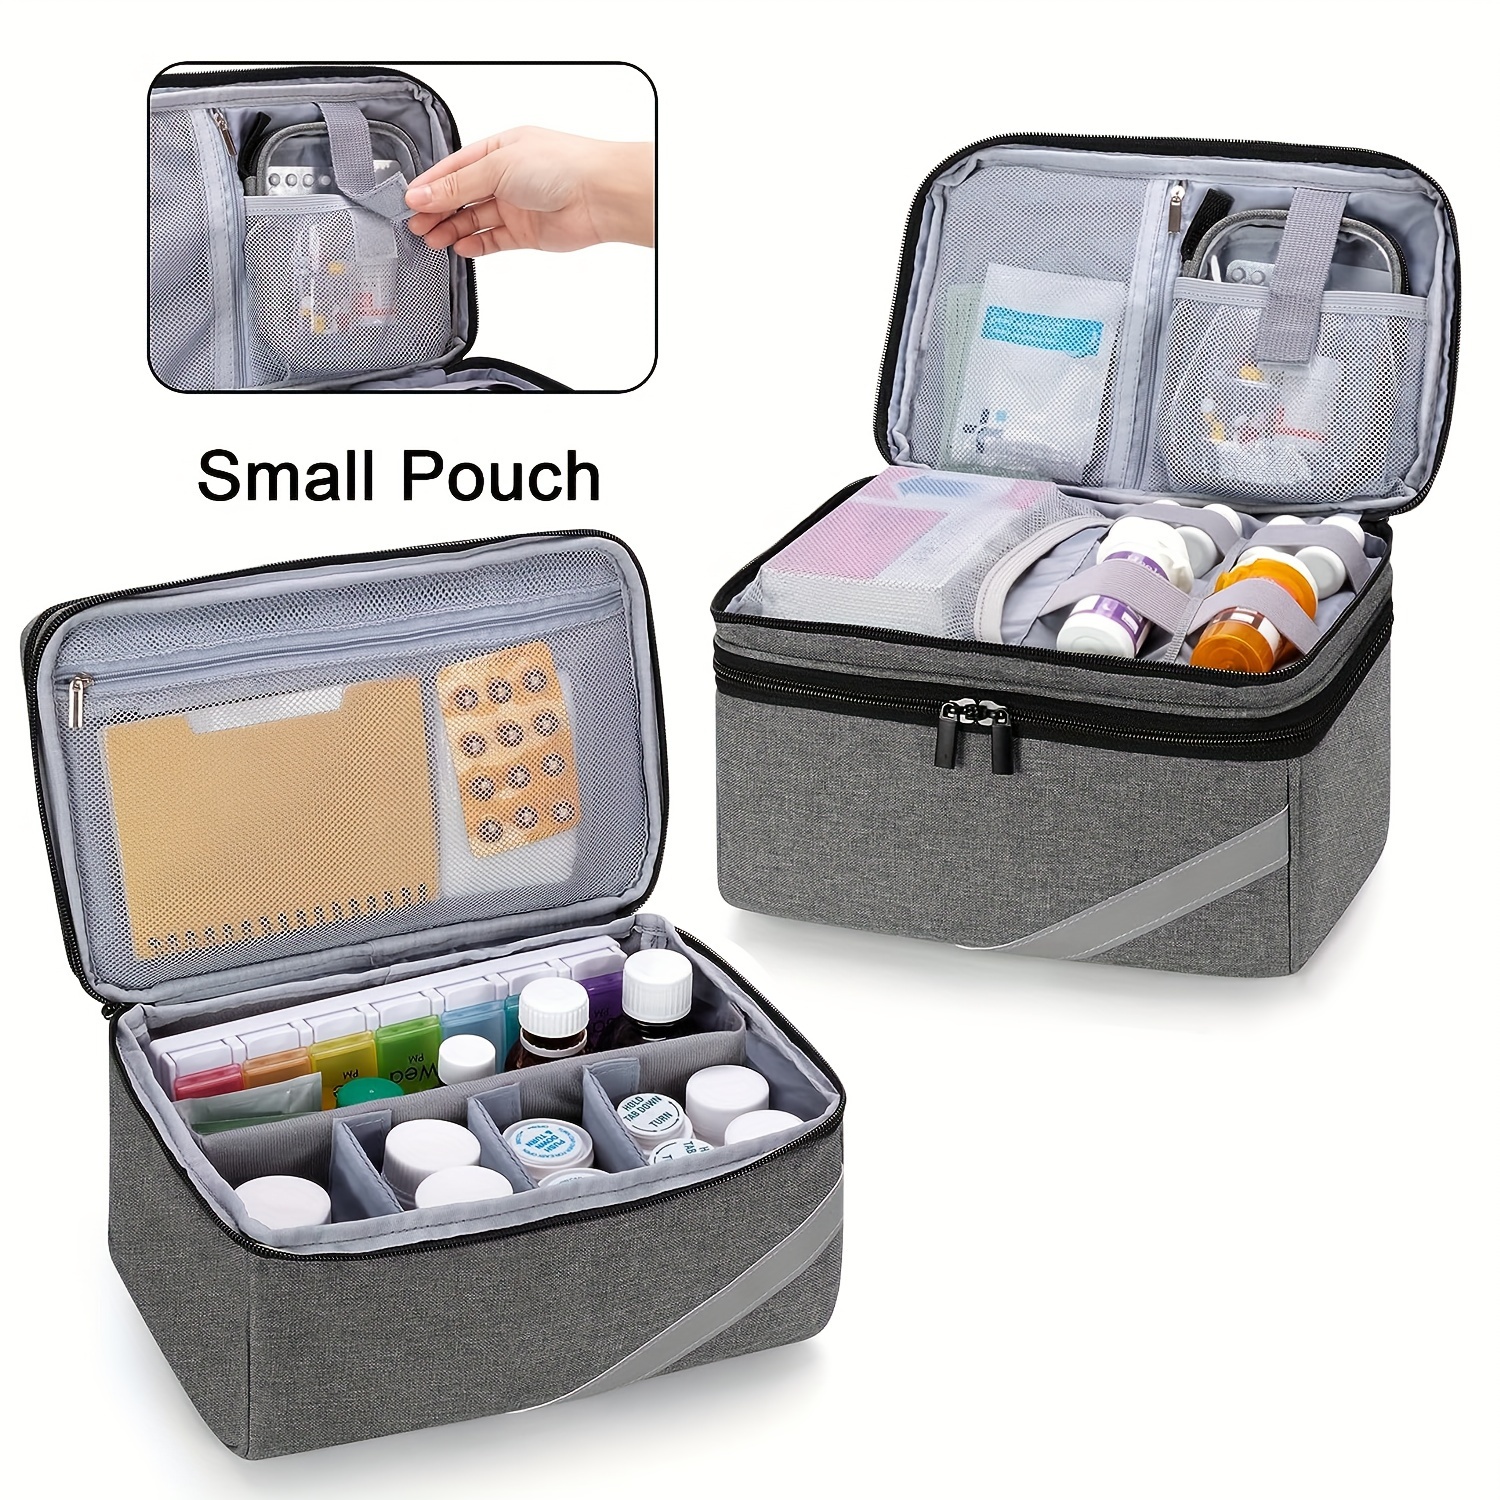 Large Medicine Organizer Bag Box - Empty First Aid Kits Bags for Emergency.  Pill Bottle Storage Container, Medical Supplies Case for Home, Travel